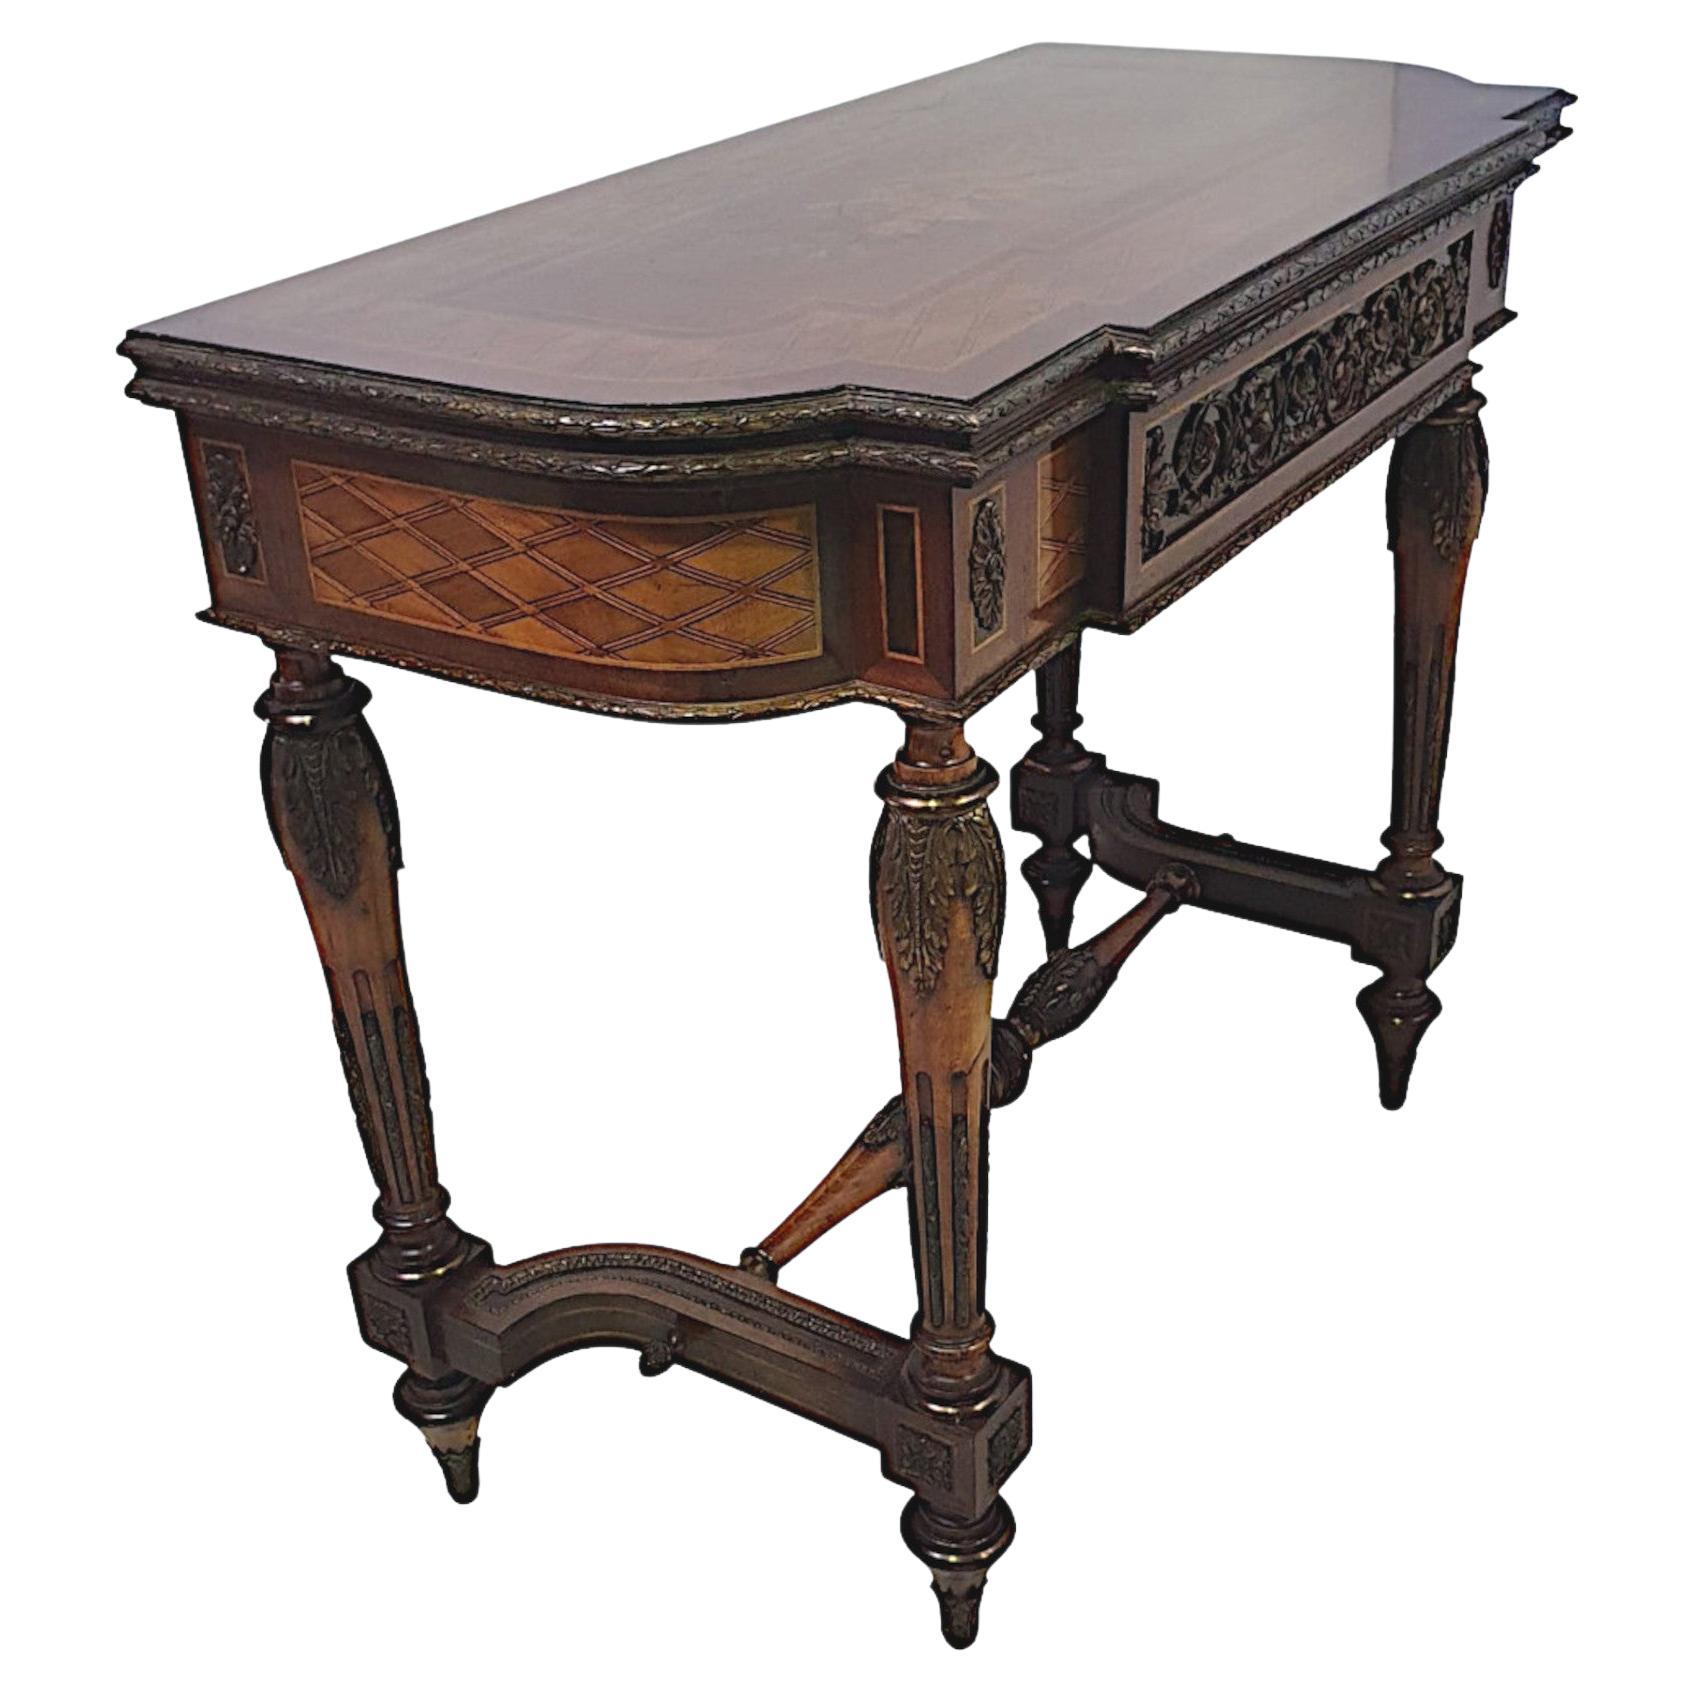 Very Fine and Rare 19th Century Museum Quality Marquetry Inlaid Card Table